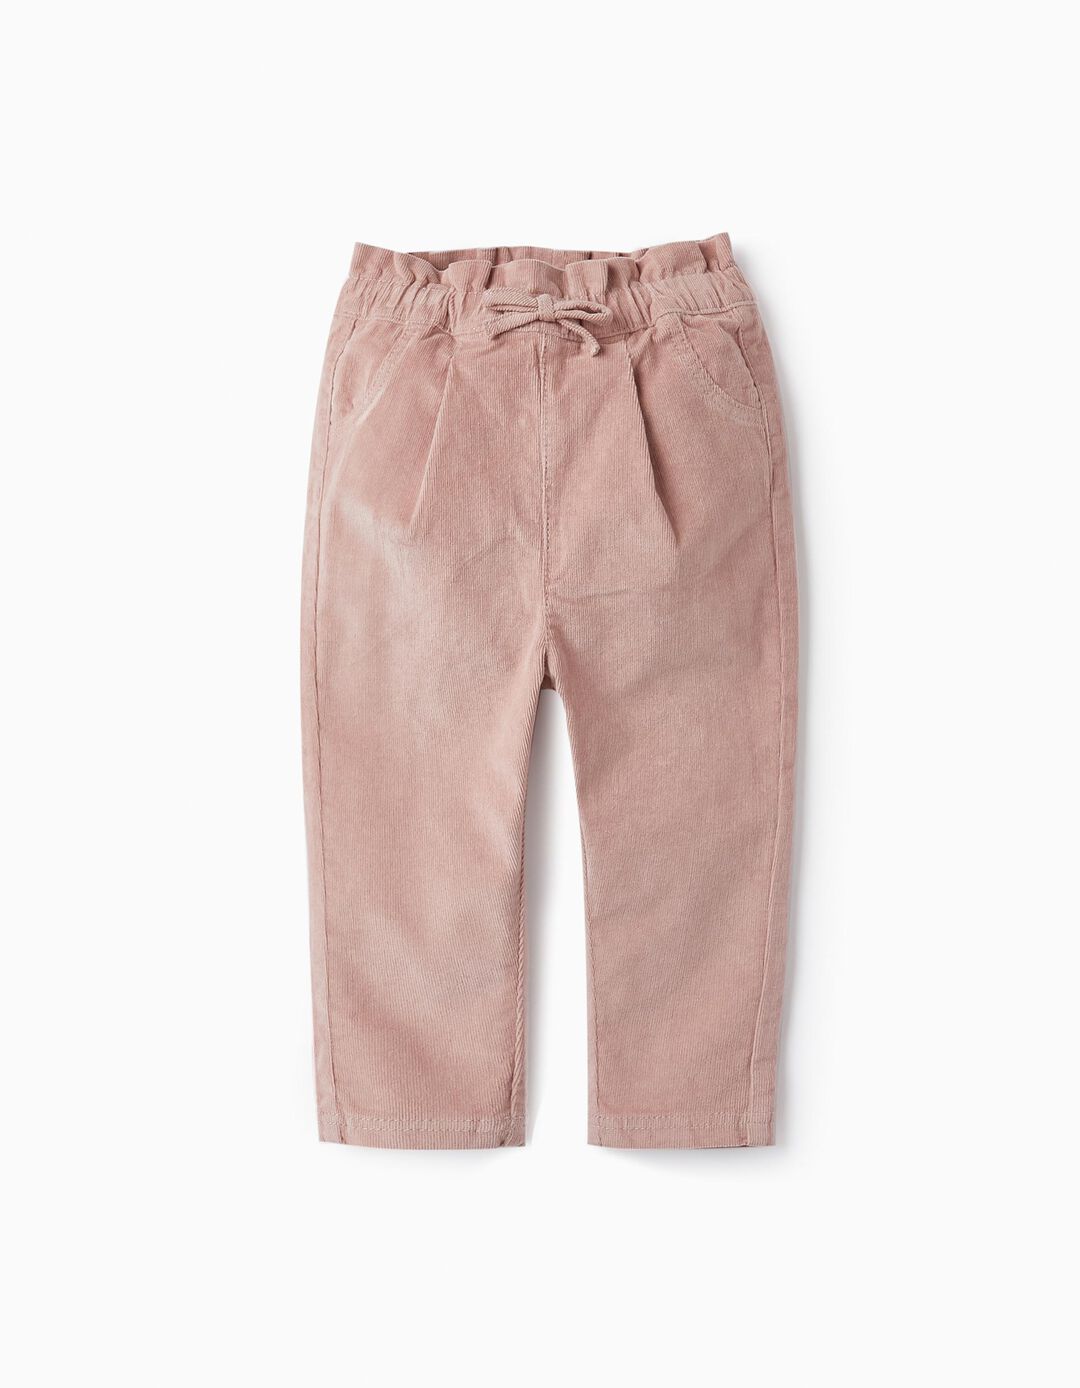 Paperbag Corduroy Trousers for Baby Girls, Light Pink